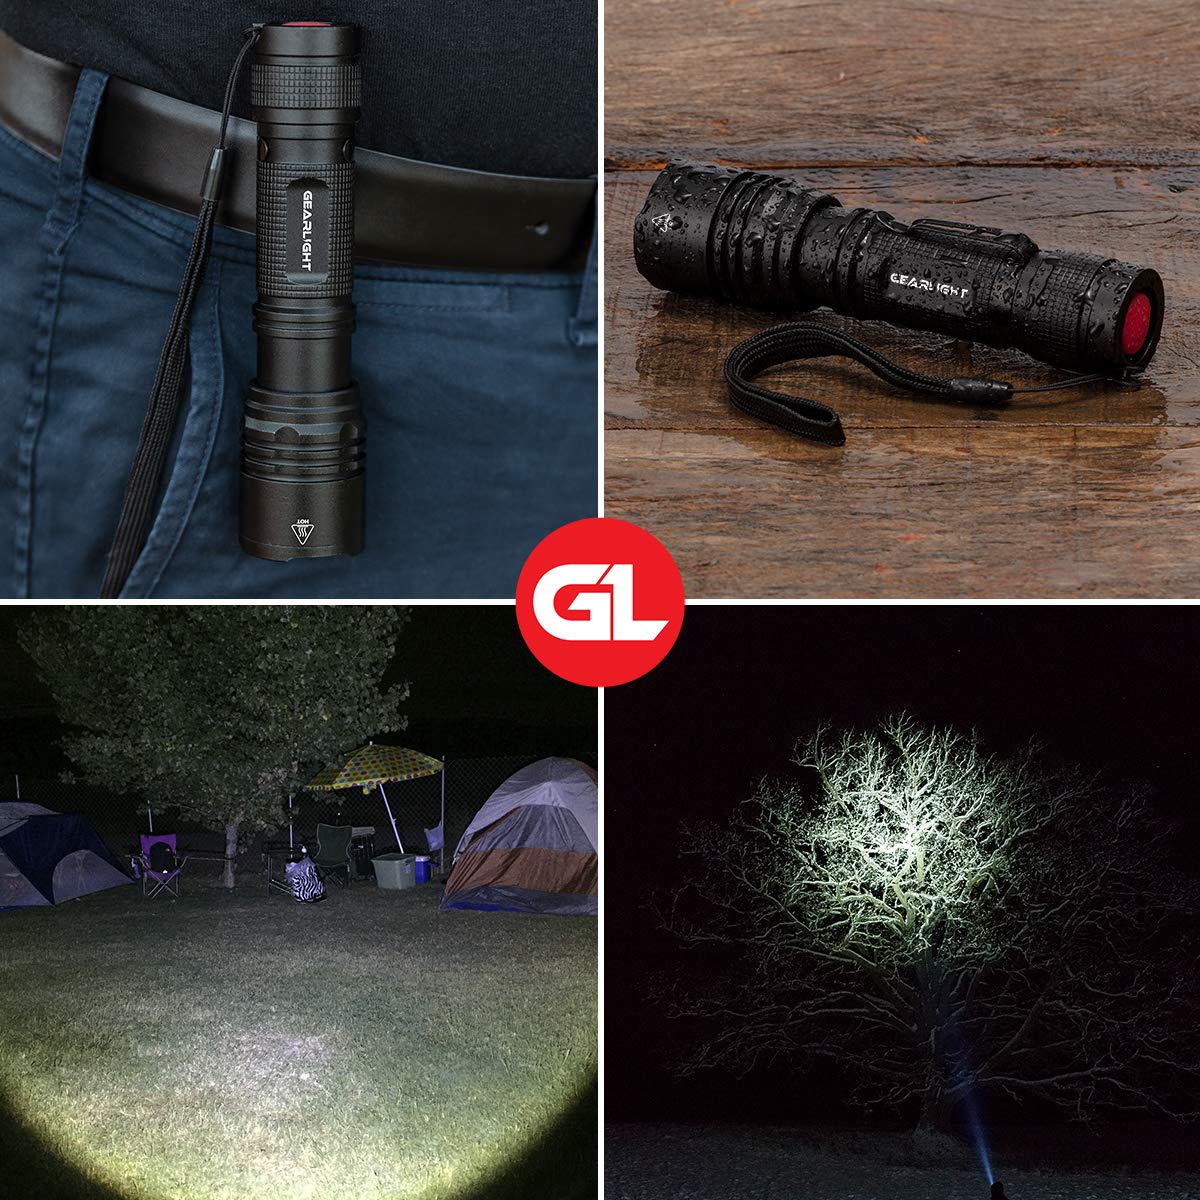 GearLight TAC LED Tactical Flashlight [2 PACK] - Single Mode, High Lumen, Zoomable, Water Resistant, Flash Light - Camping, Outdoor, Emergency, Everyday Flashlights with Clip - image 5 of 7